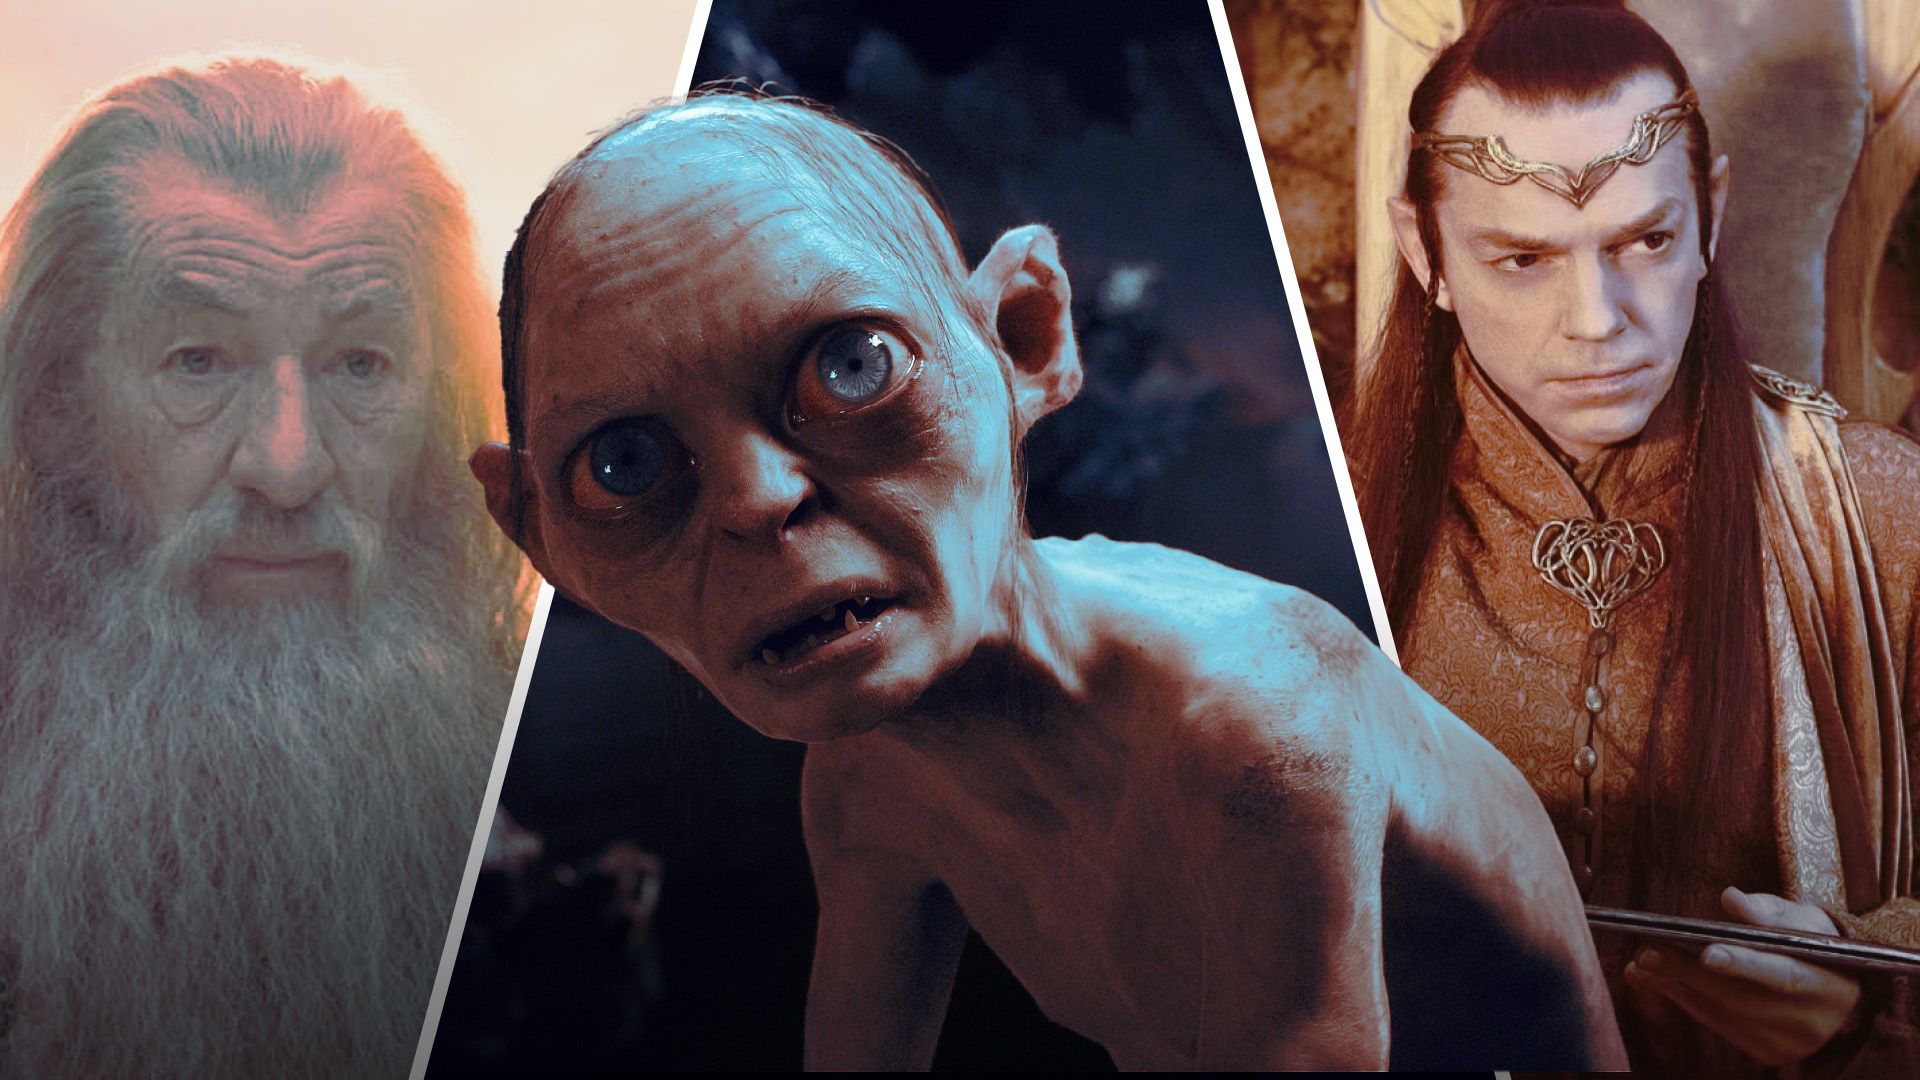 x Major LotR Characters Likely to Return in The Hunt for Gollum (According to the Books)